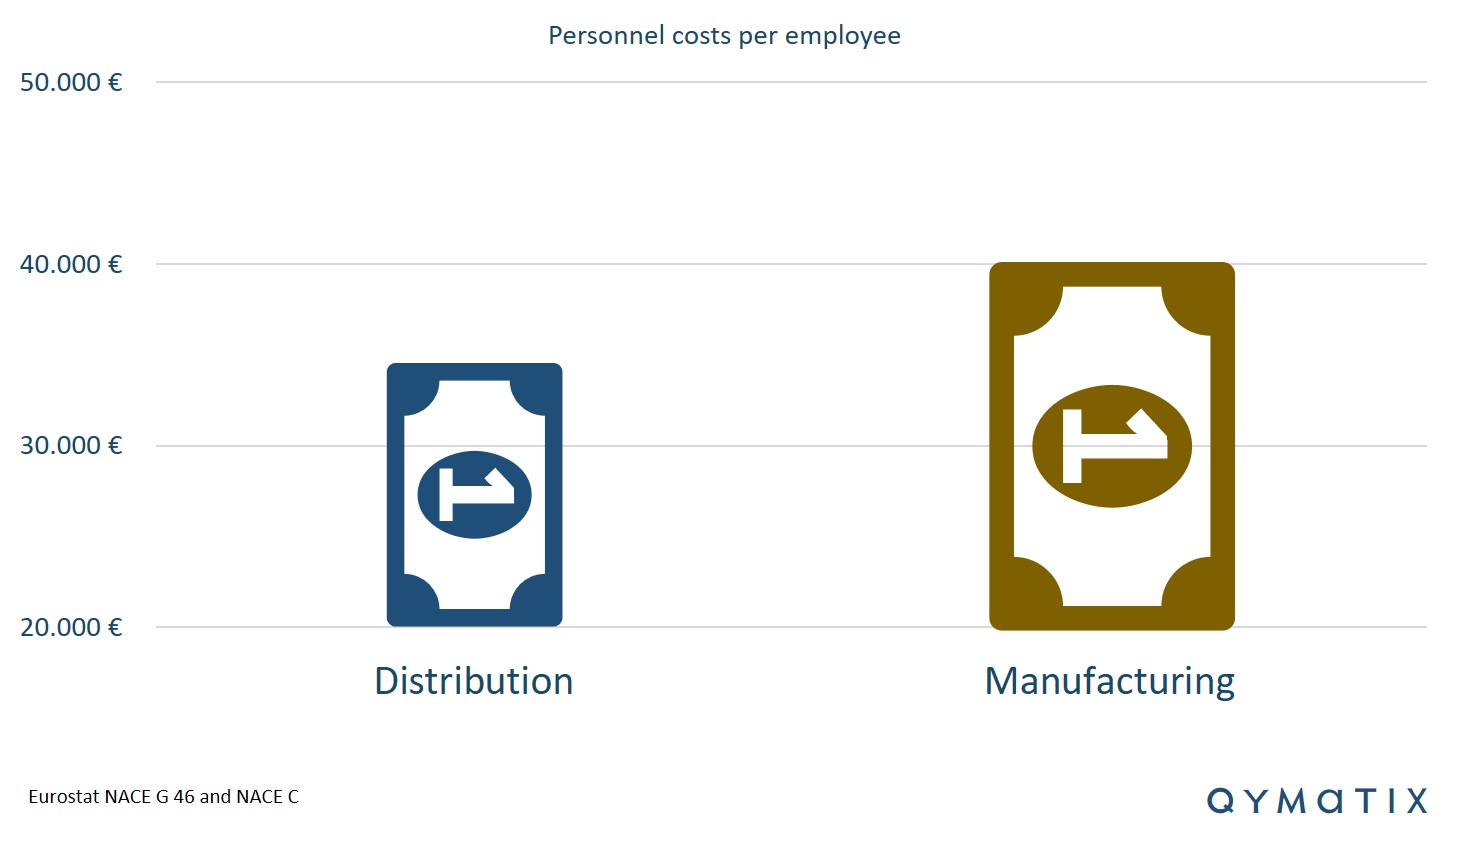 personnel-costs-per-employee-distribution-manufacturing